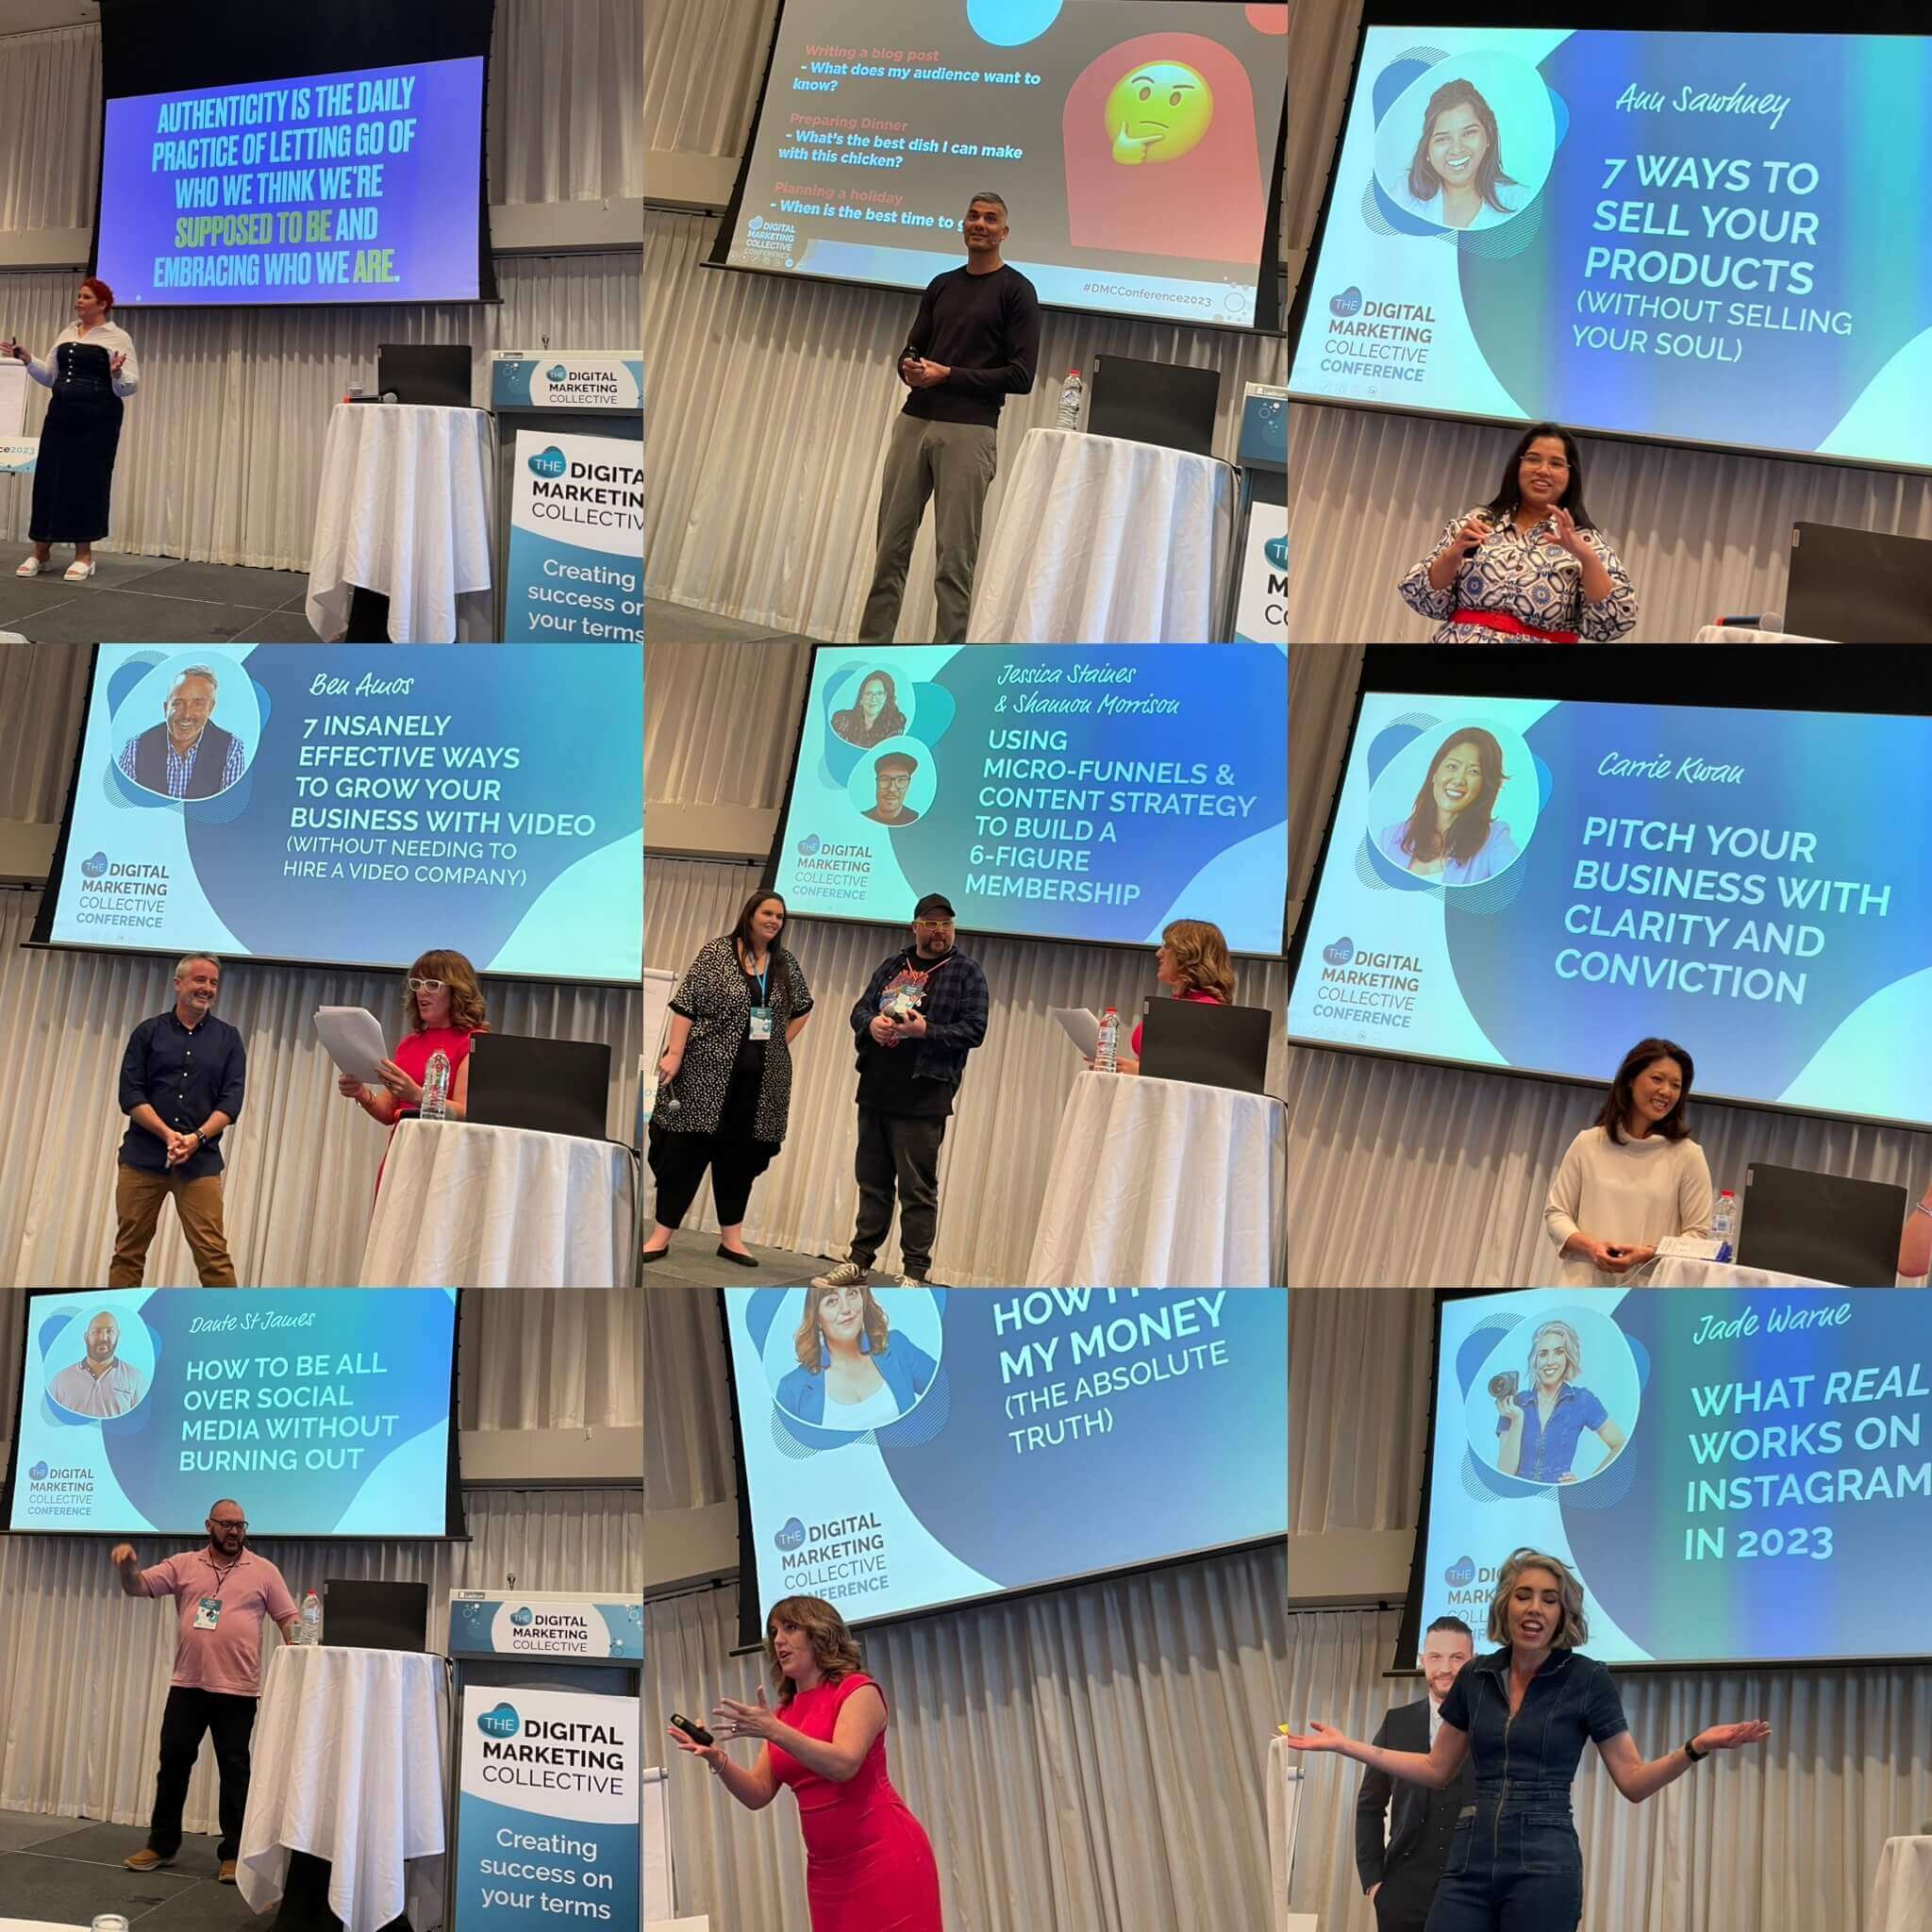 A collage of photos of the presentations at the Digital Marketing Conference.